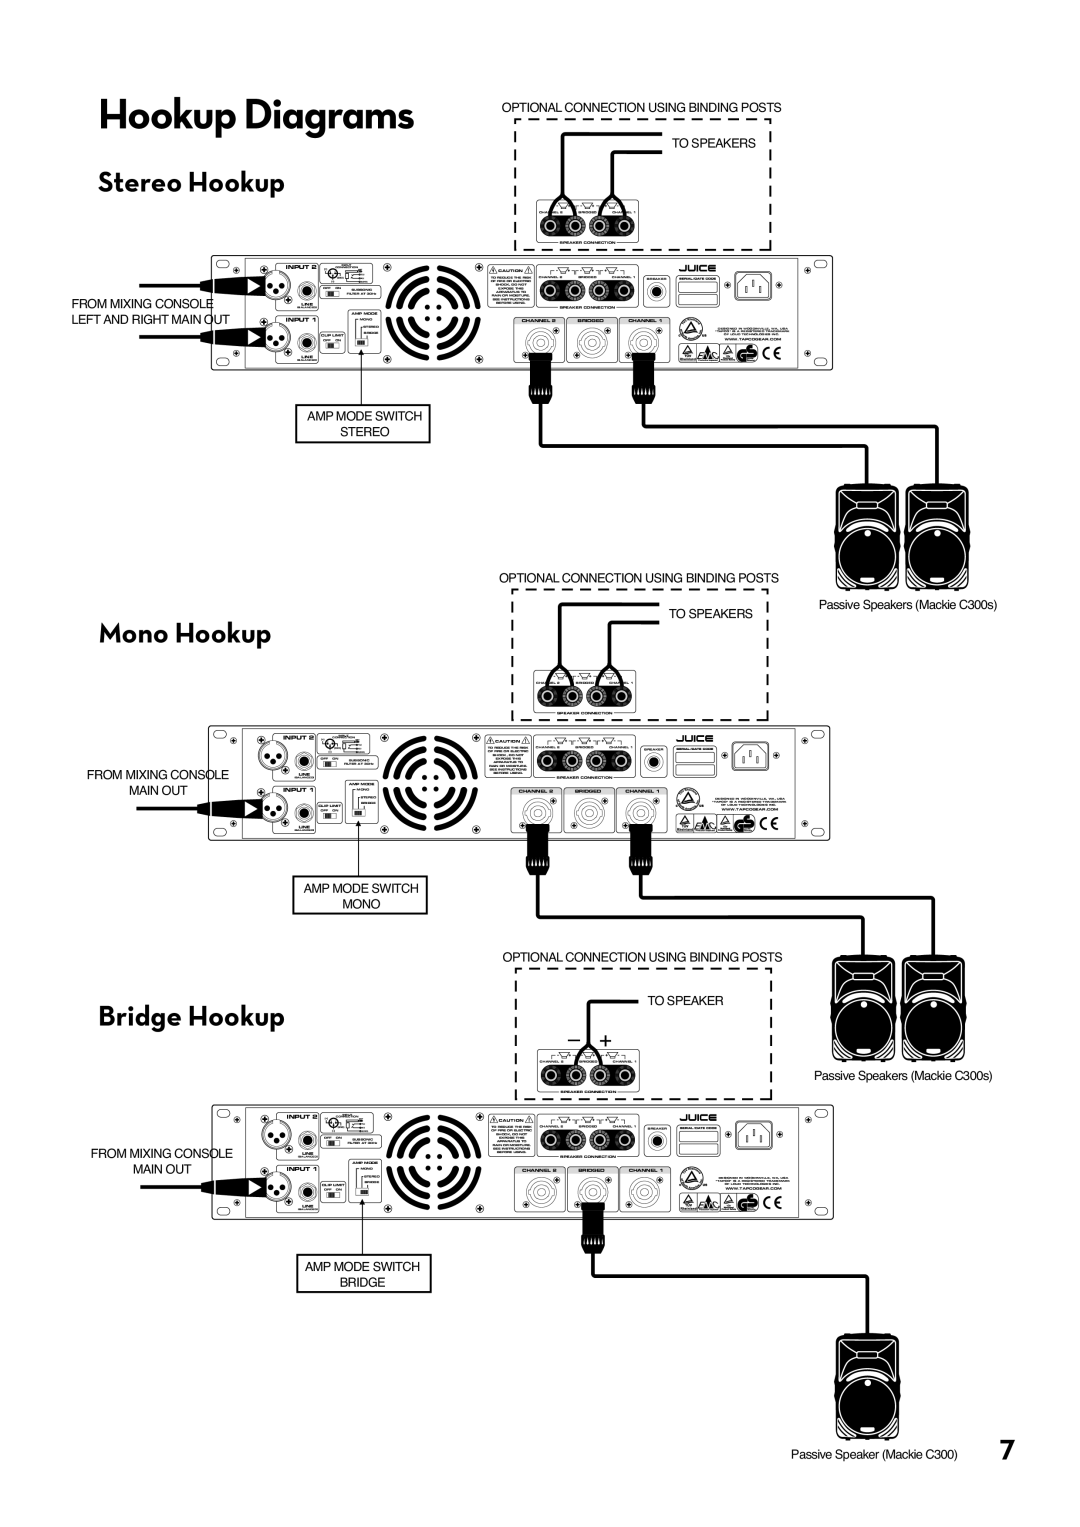 Tapco pmn manual Hookup Diagrams, Stereo Hookup, Mono Hookup, Bridge Hookup, From Mixing Console, Left And Right Main Out 